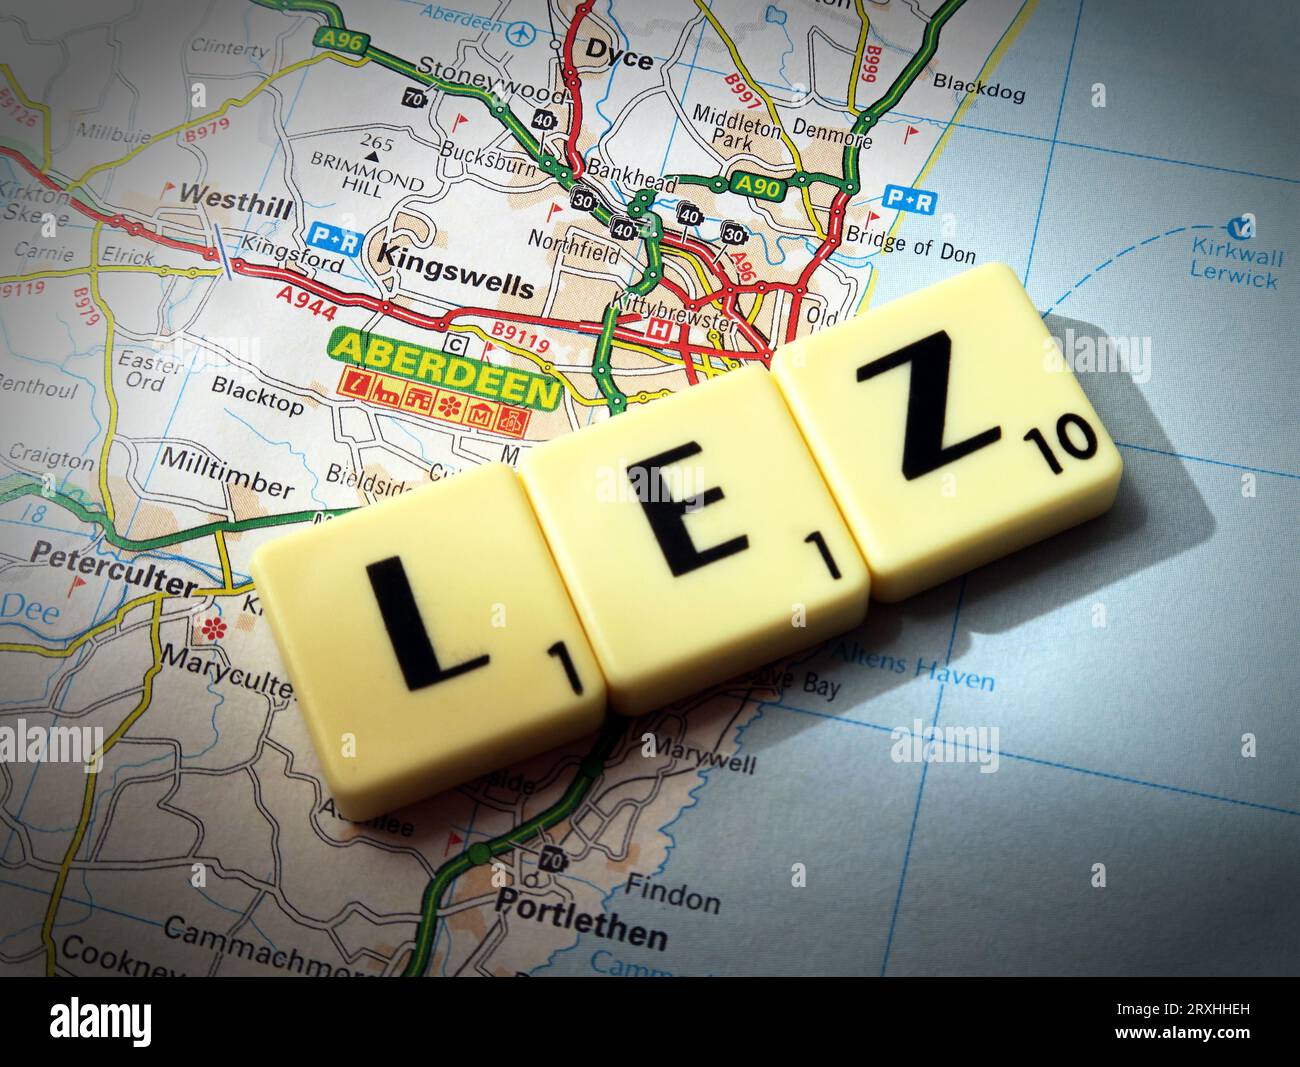 Aberdeen LEZ Low Emission Zone - in words, Scrabble letters on a map - AB11 6LX Stock Photo